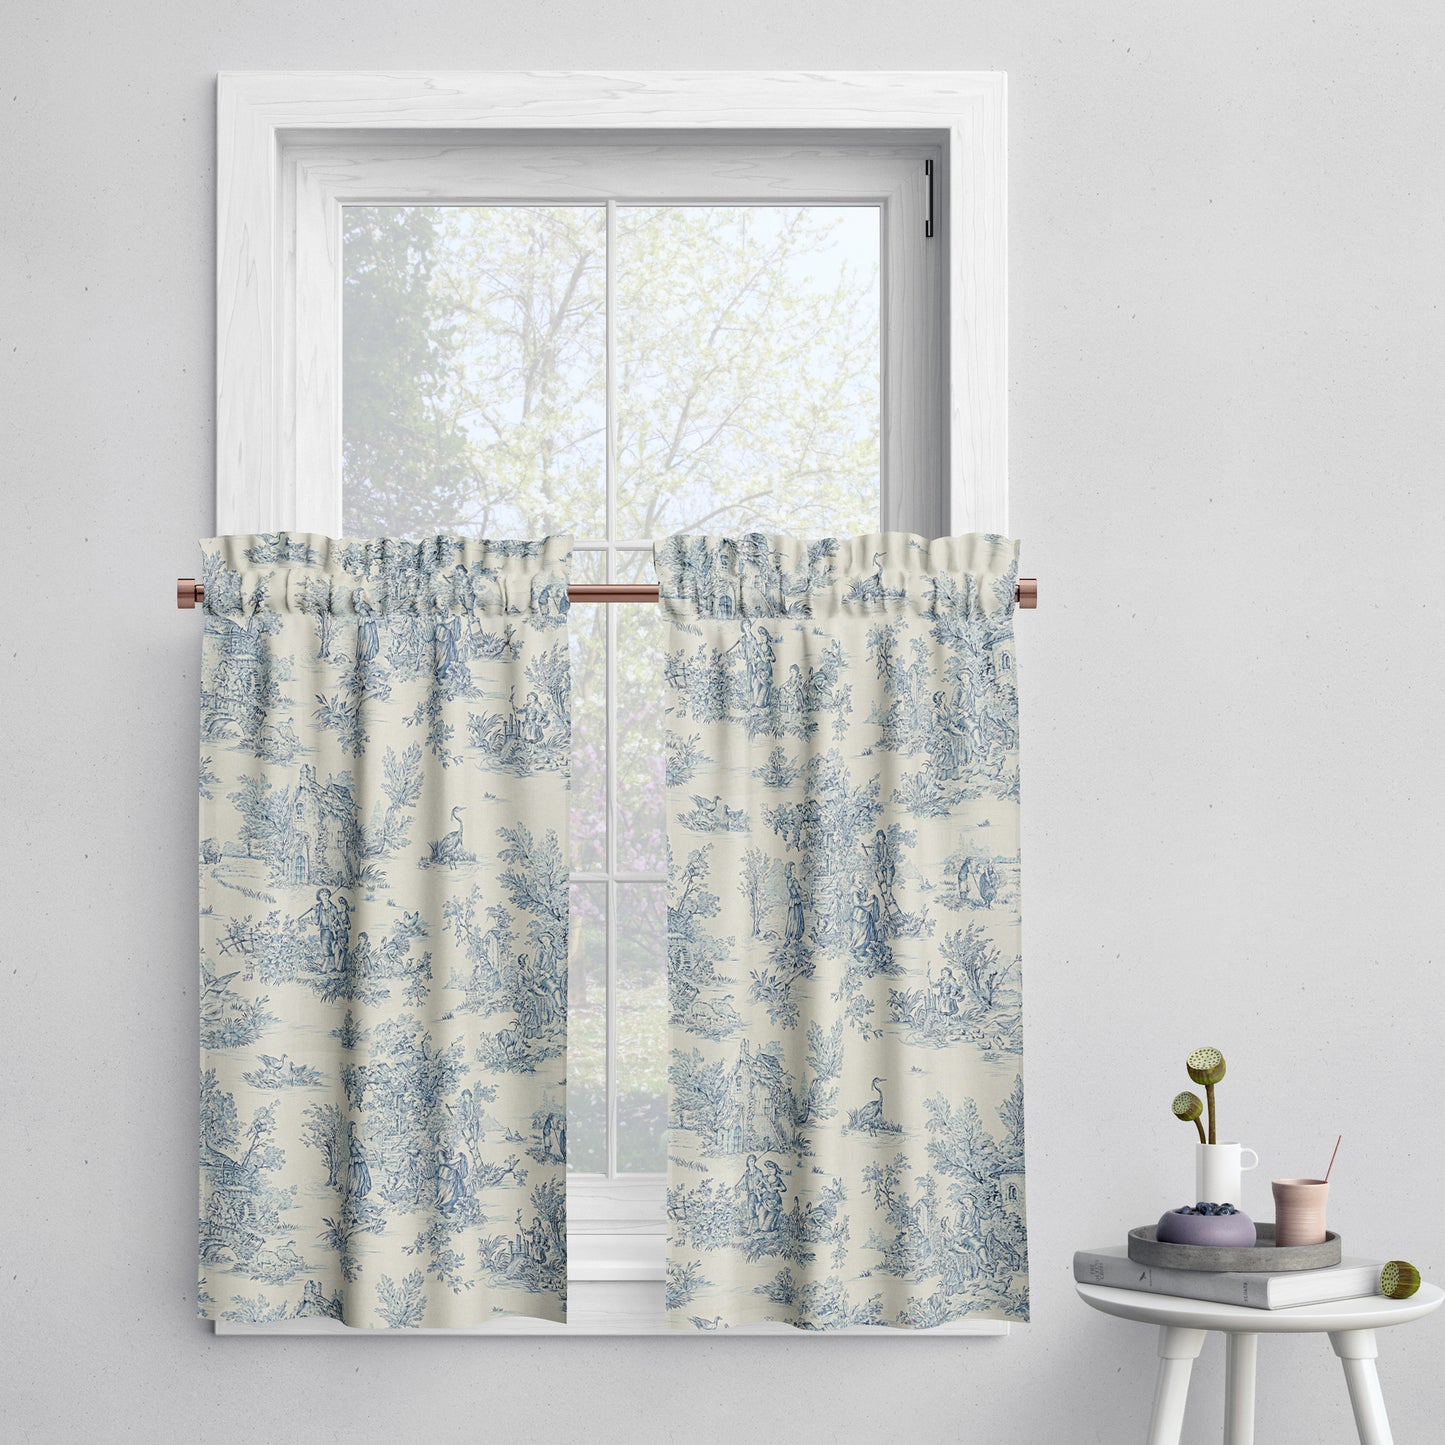 Tailored Tier Cafe Curtain Panels Pair in Pastorale #2 Blue on Cream French Country Toile